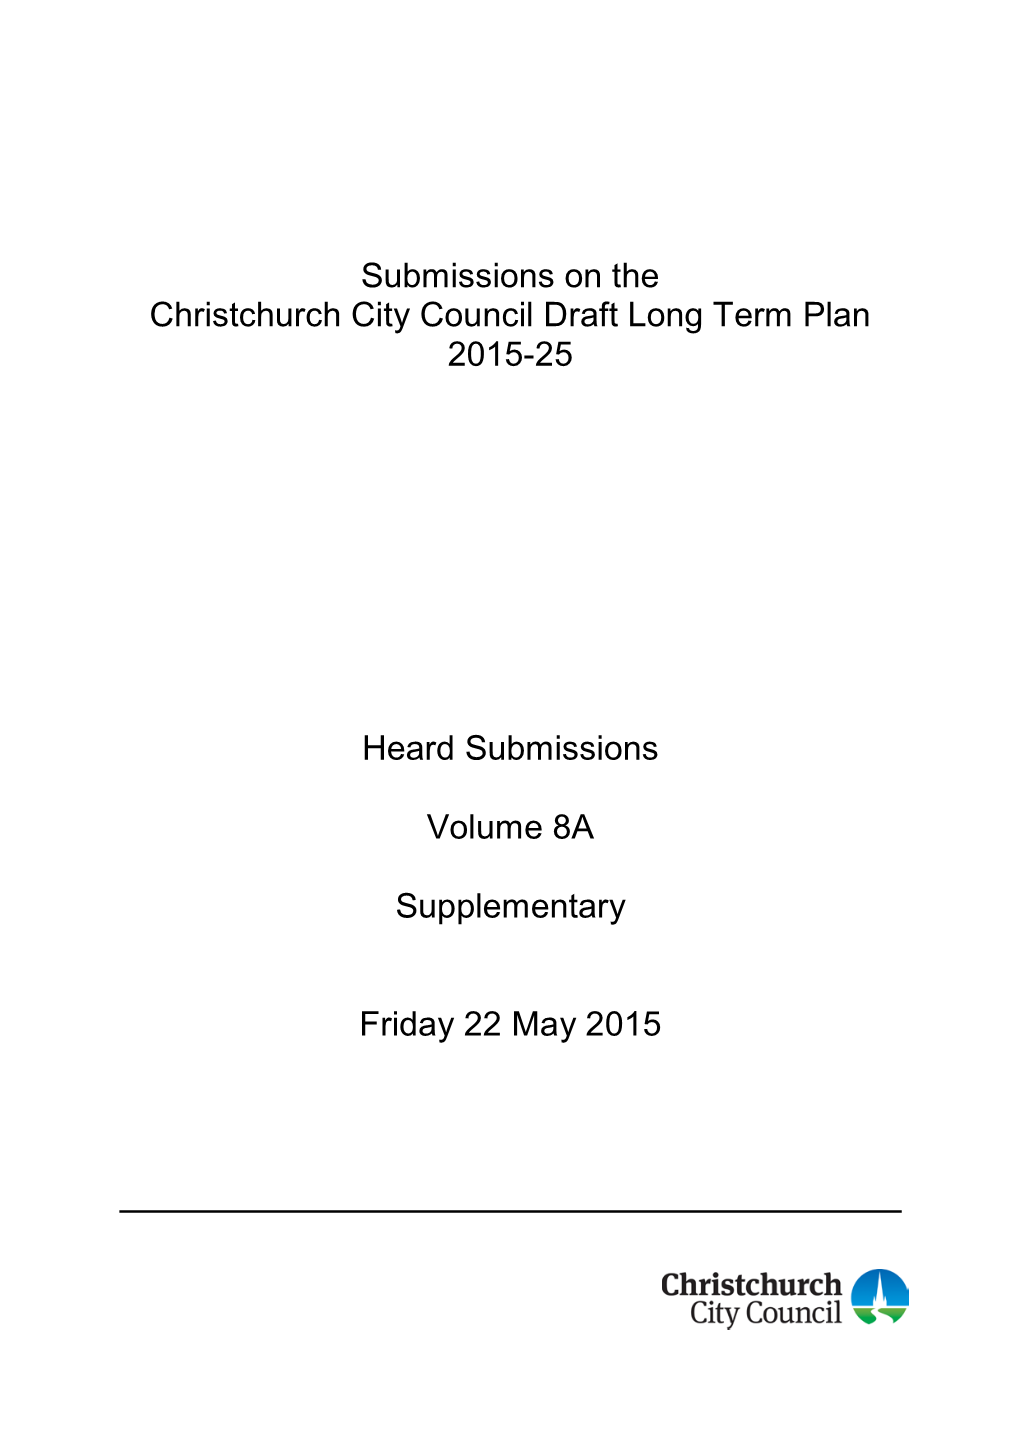 Submissions on the Christchurch City Council Draft Long Term Plan 2015-25